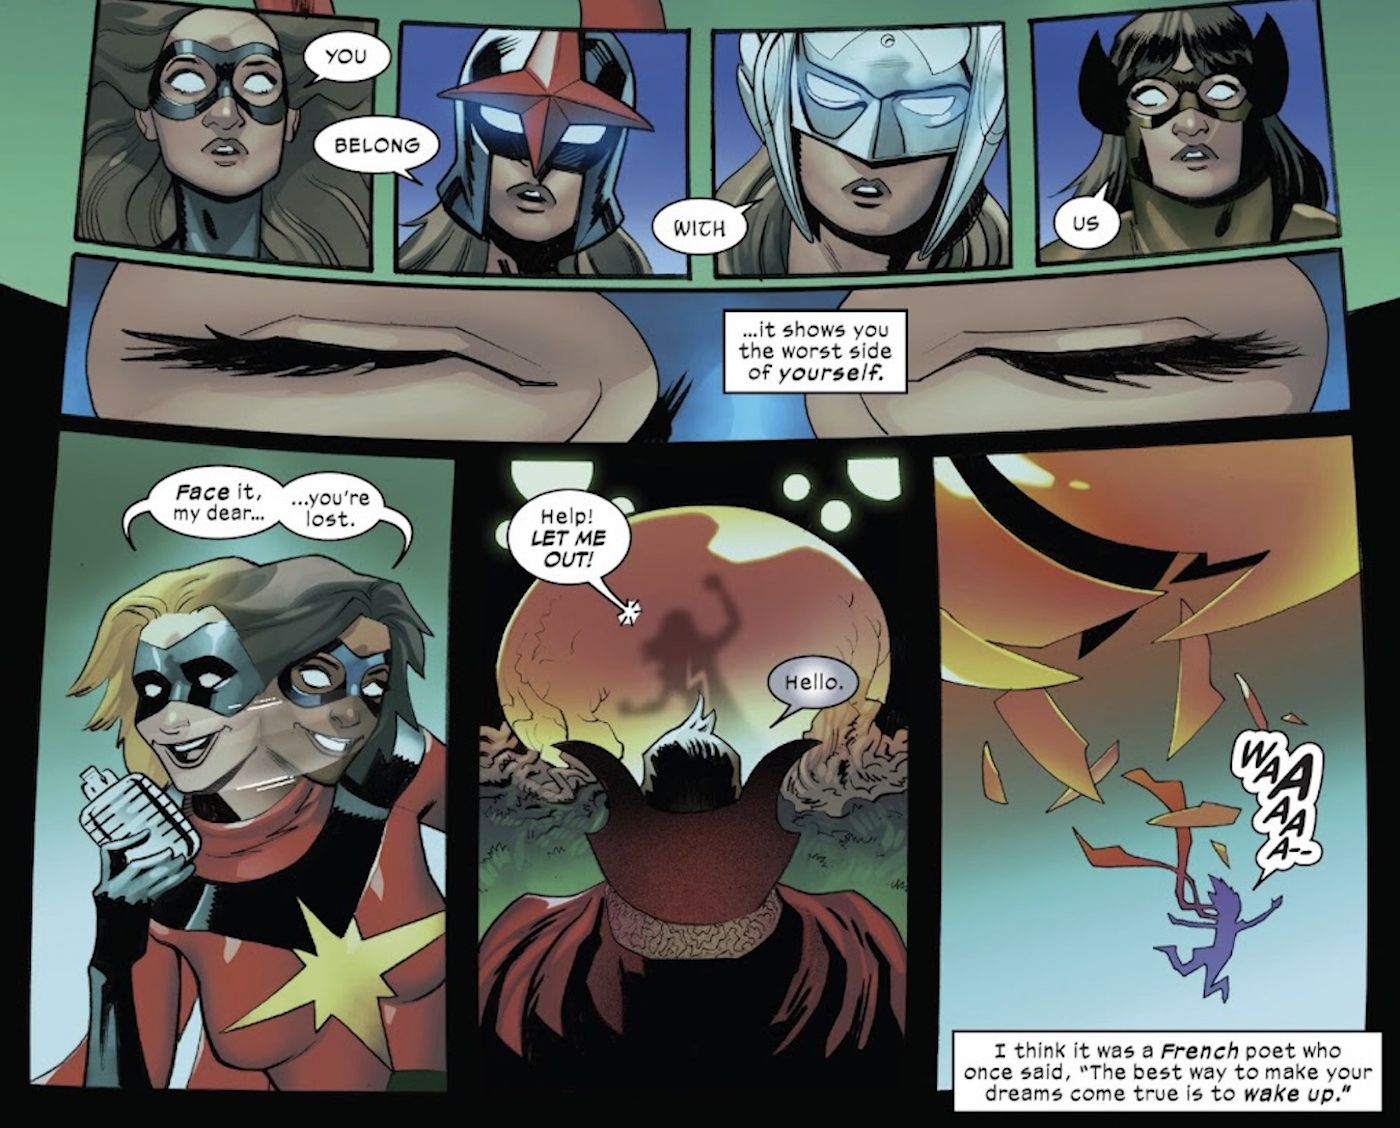 Ms. Marvel’s Mutant Power Is Reality-Warping Fanfiction – X-Men Fan Theory Explained